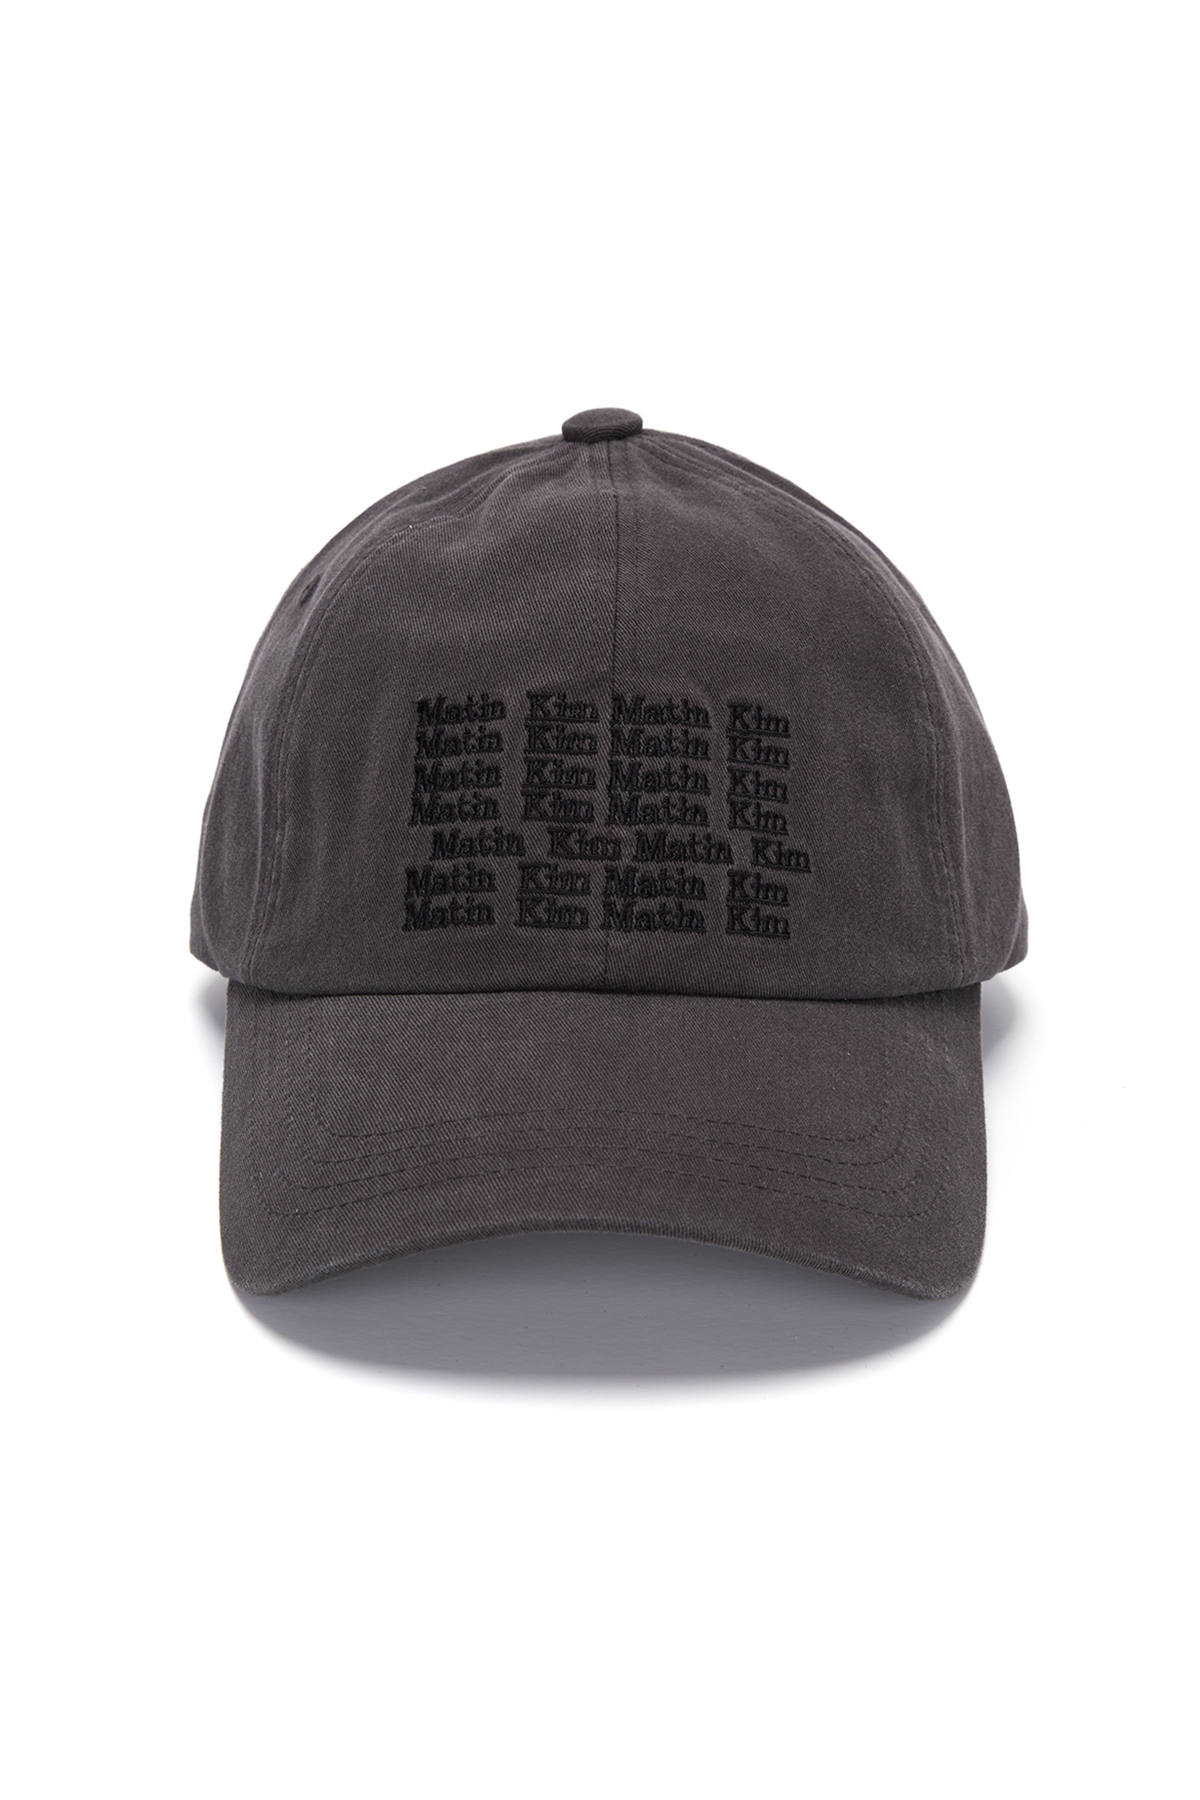 LETTERING BALL CAP IN CHARCOAL